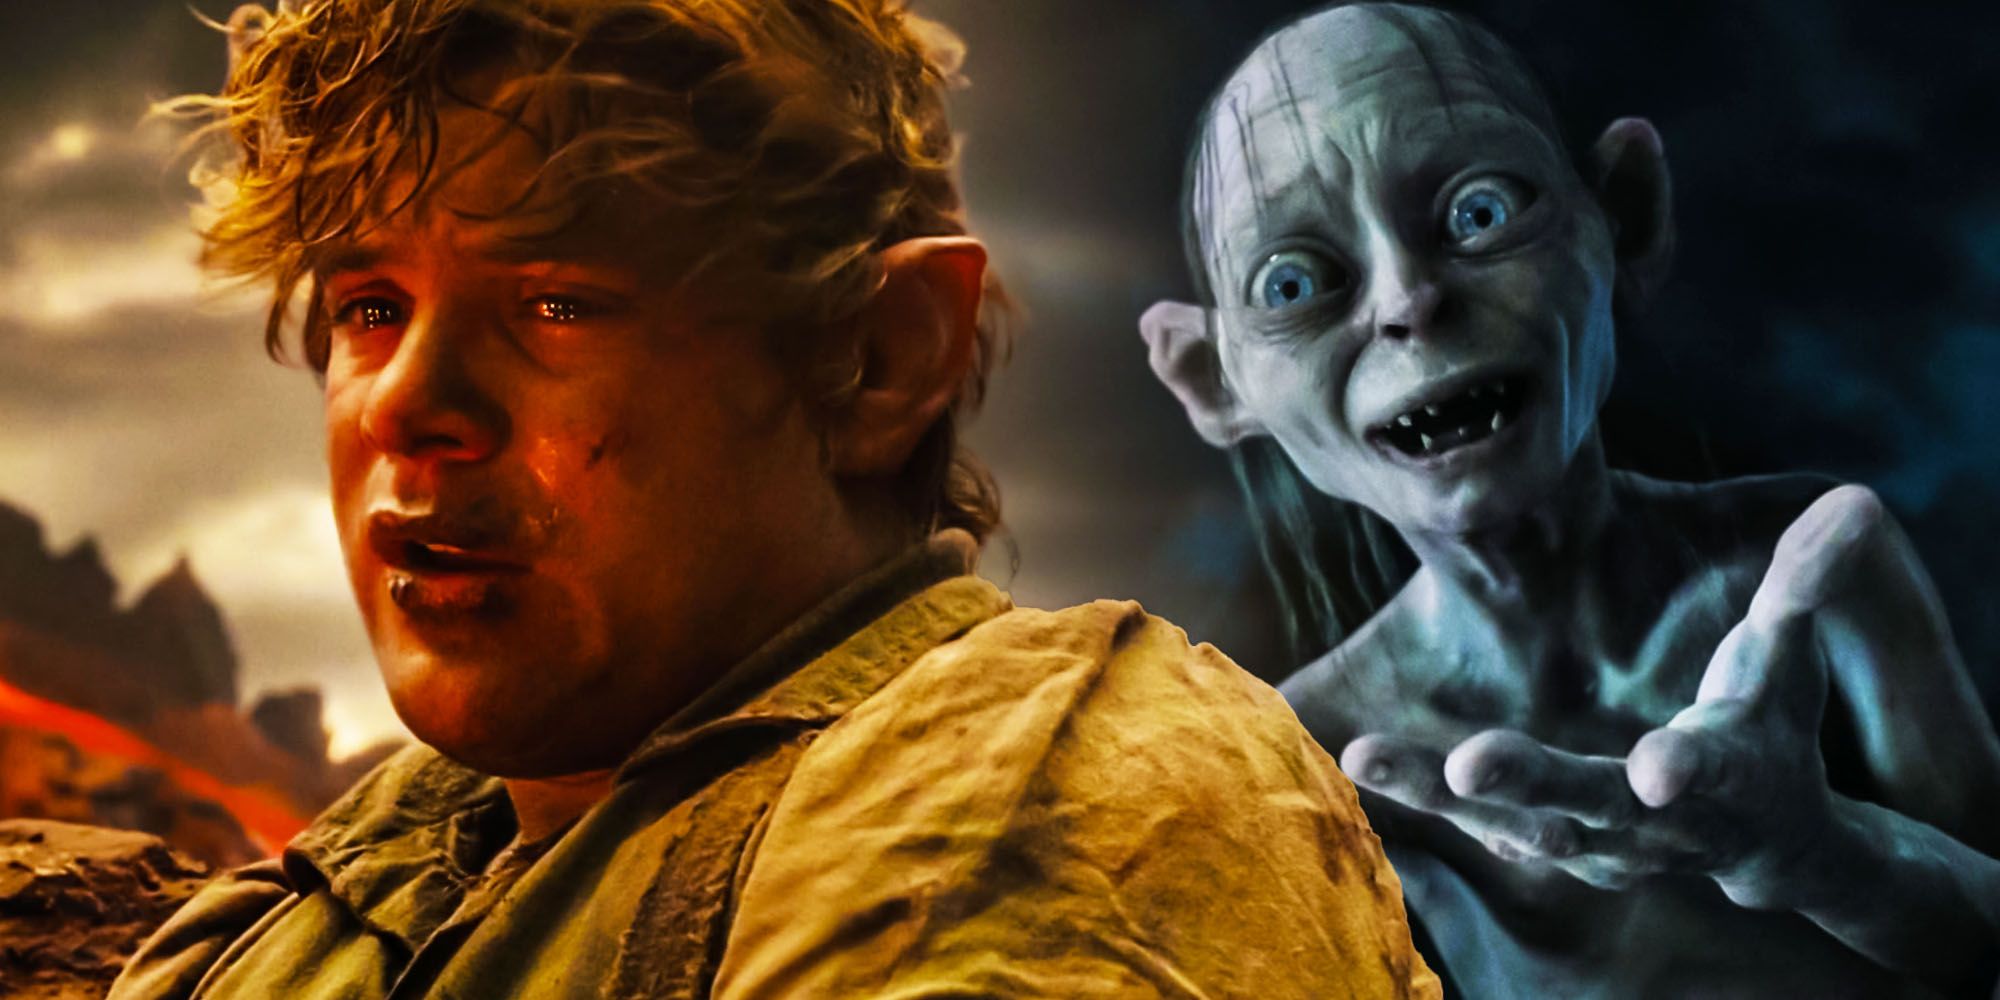 Lord of the rings Gollum Saved Sam